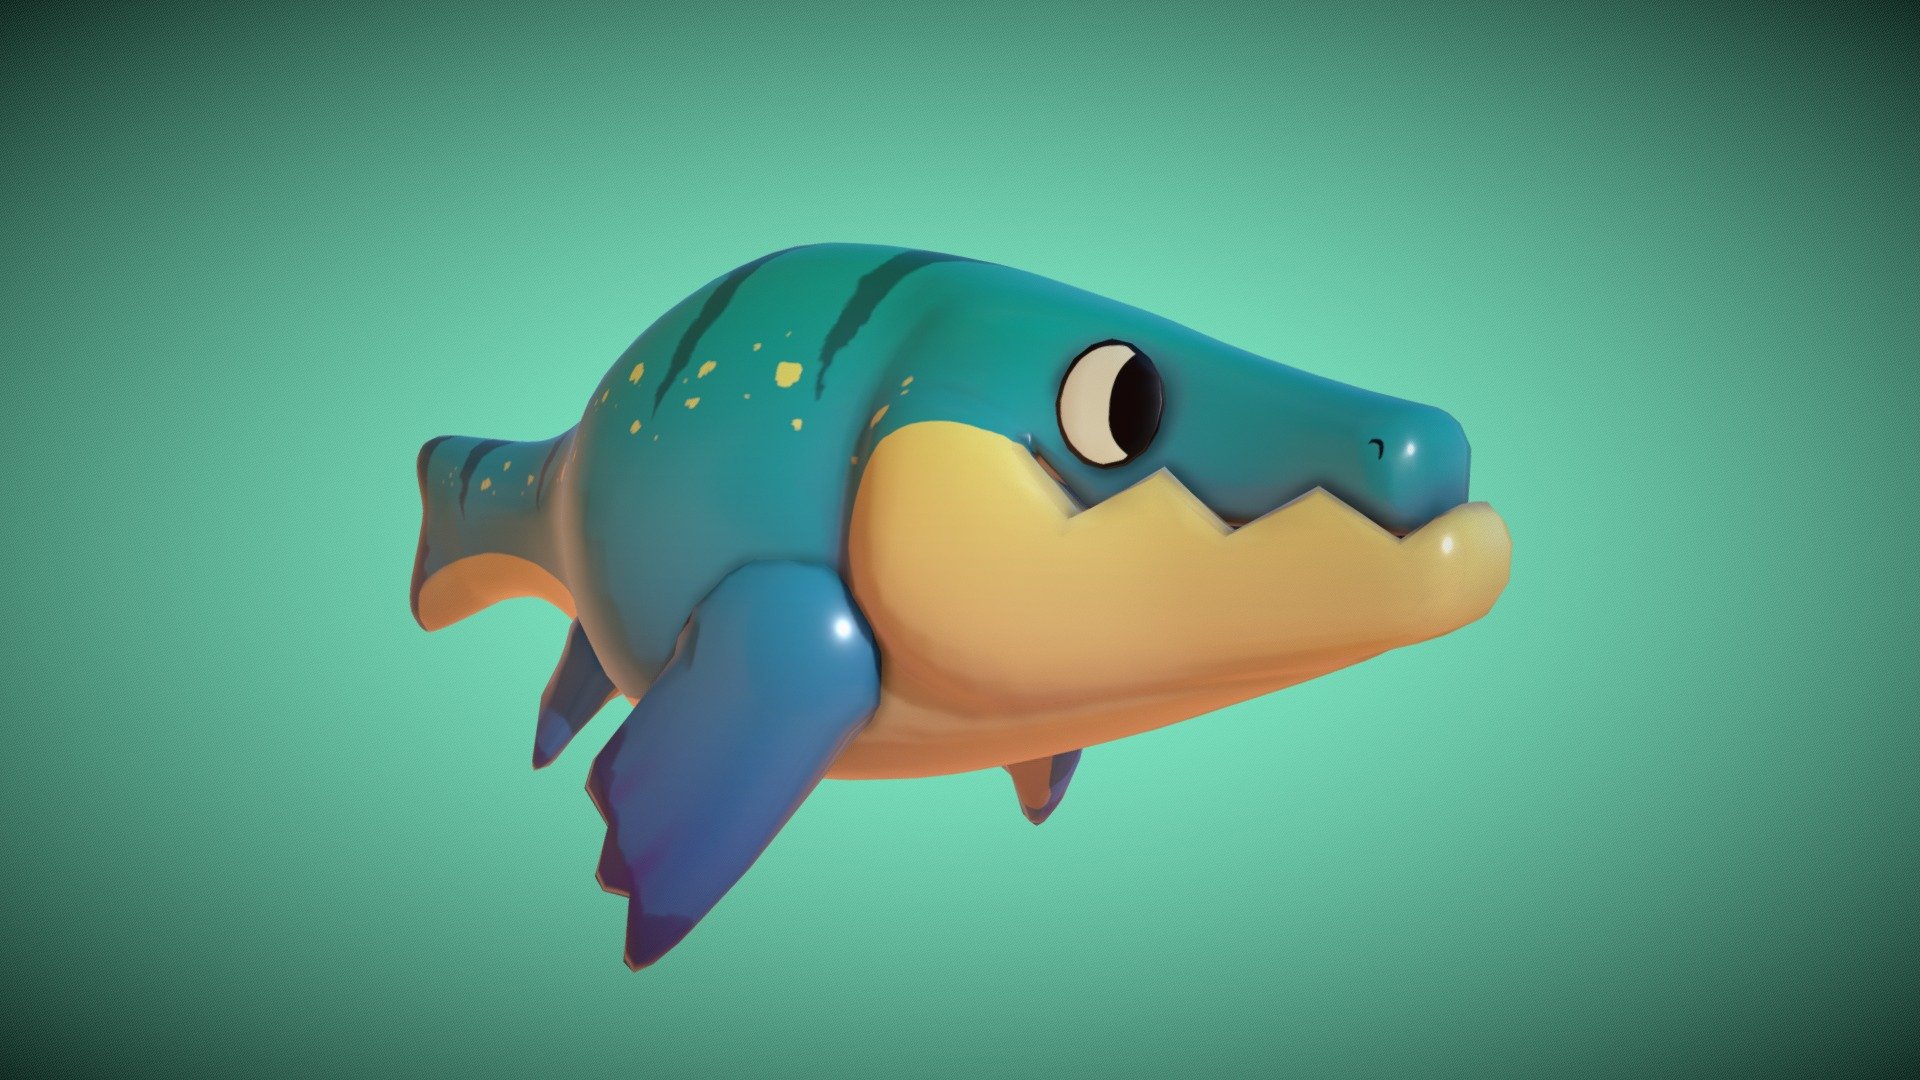 3D model of a cute mosasaur for my final university project.

Modeled, Rigged and animated in Maya LT 2020, Textured in Substance Painter 3d model